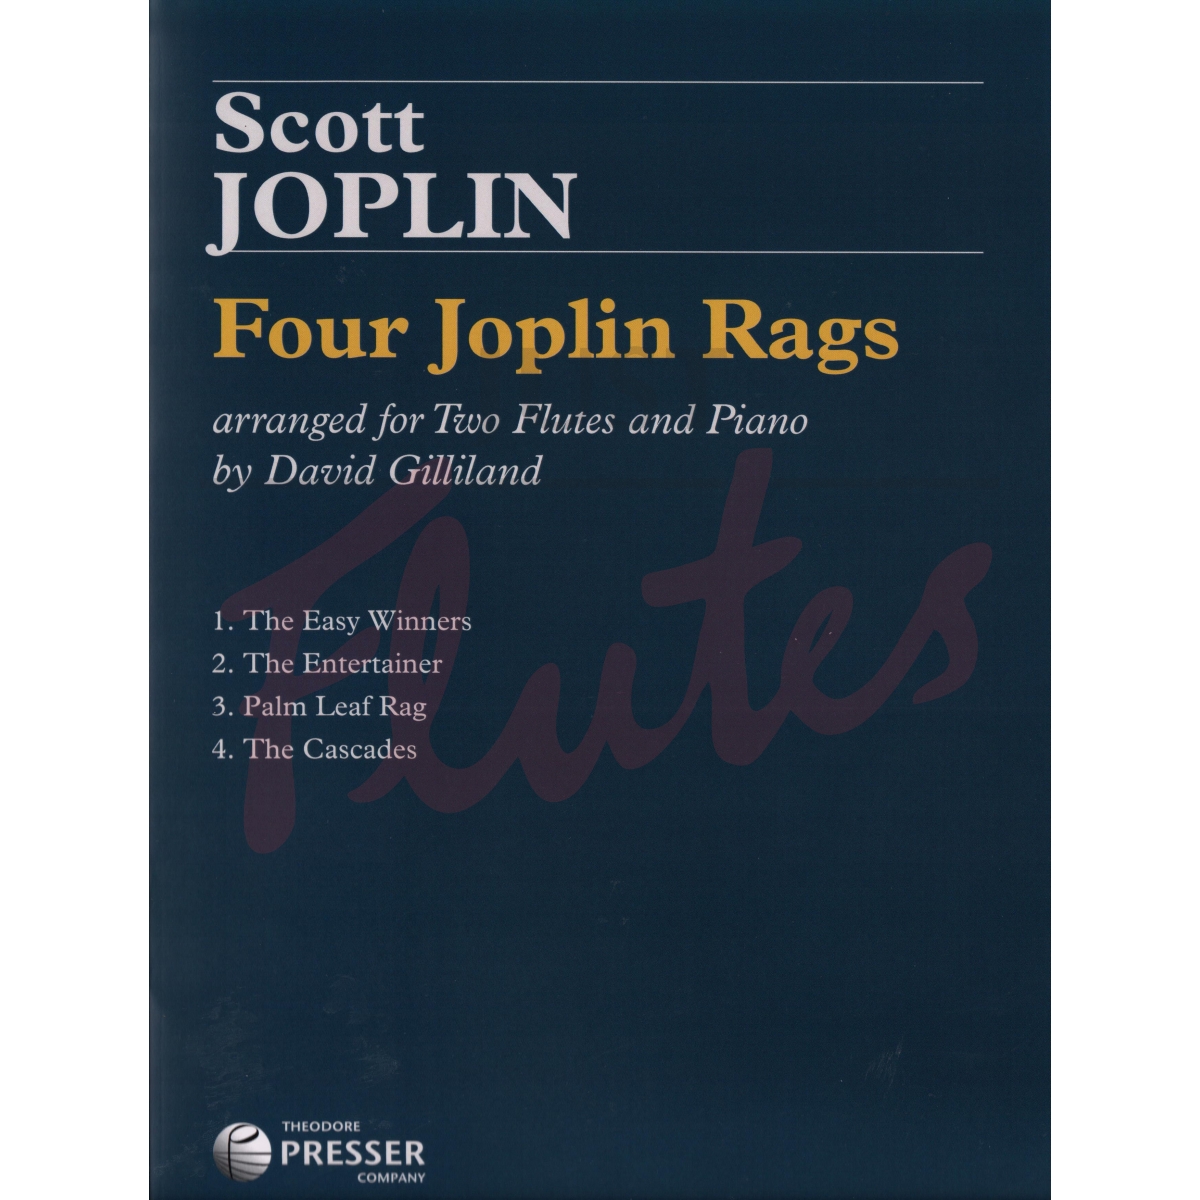 Four Joplin Rags arranged for Two Flutes and Piano